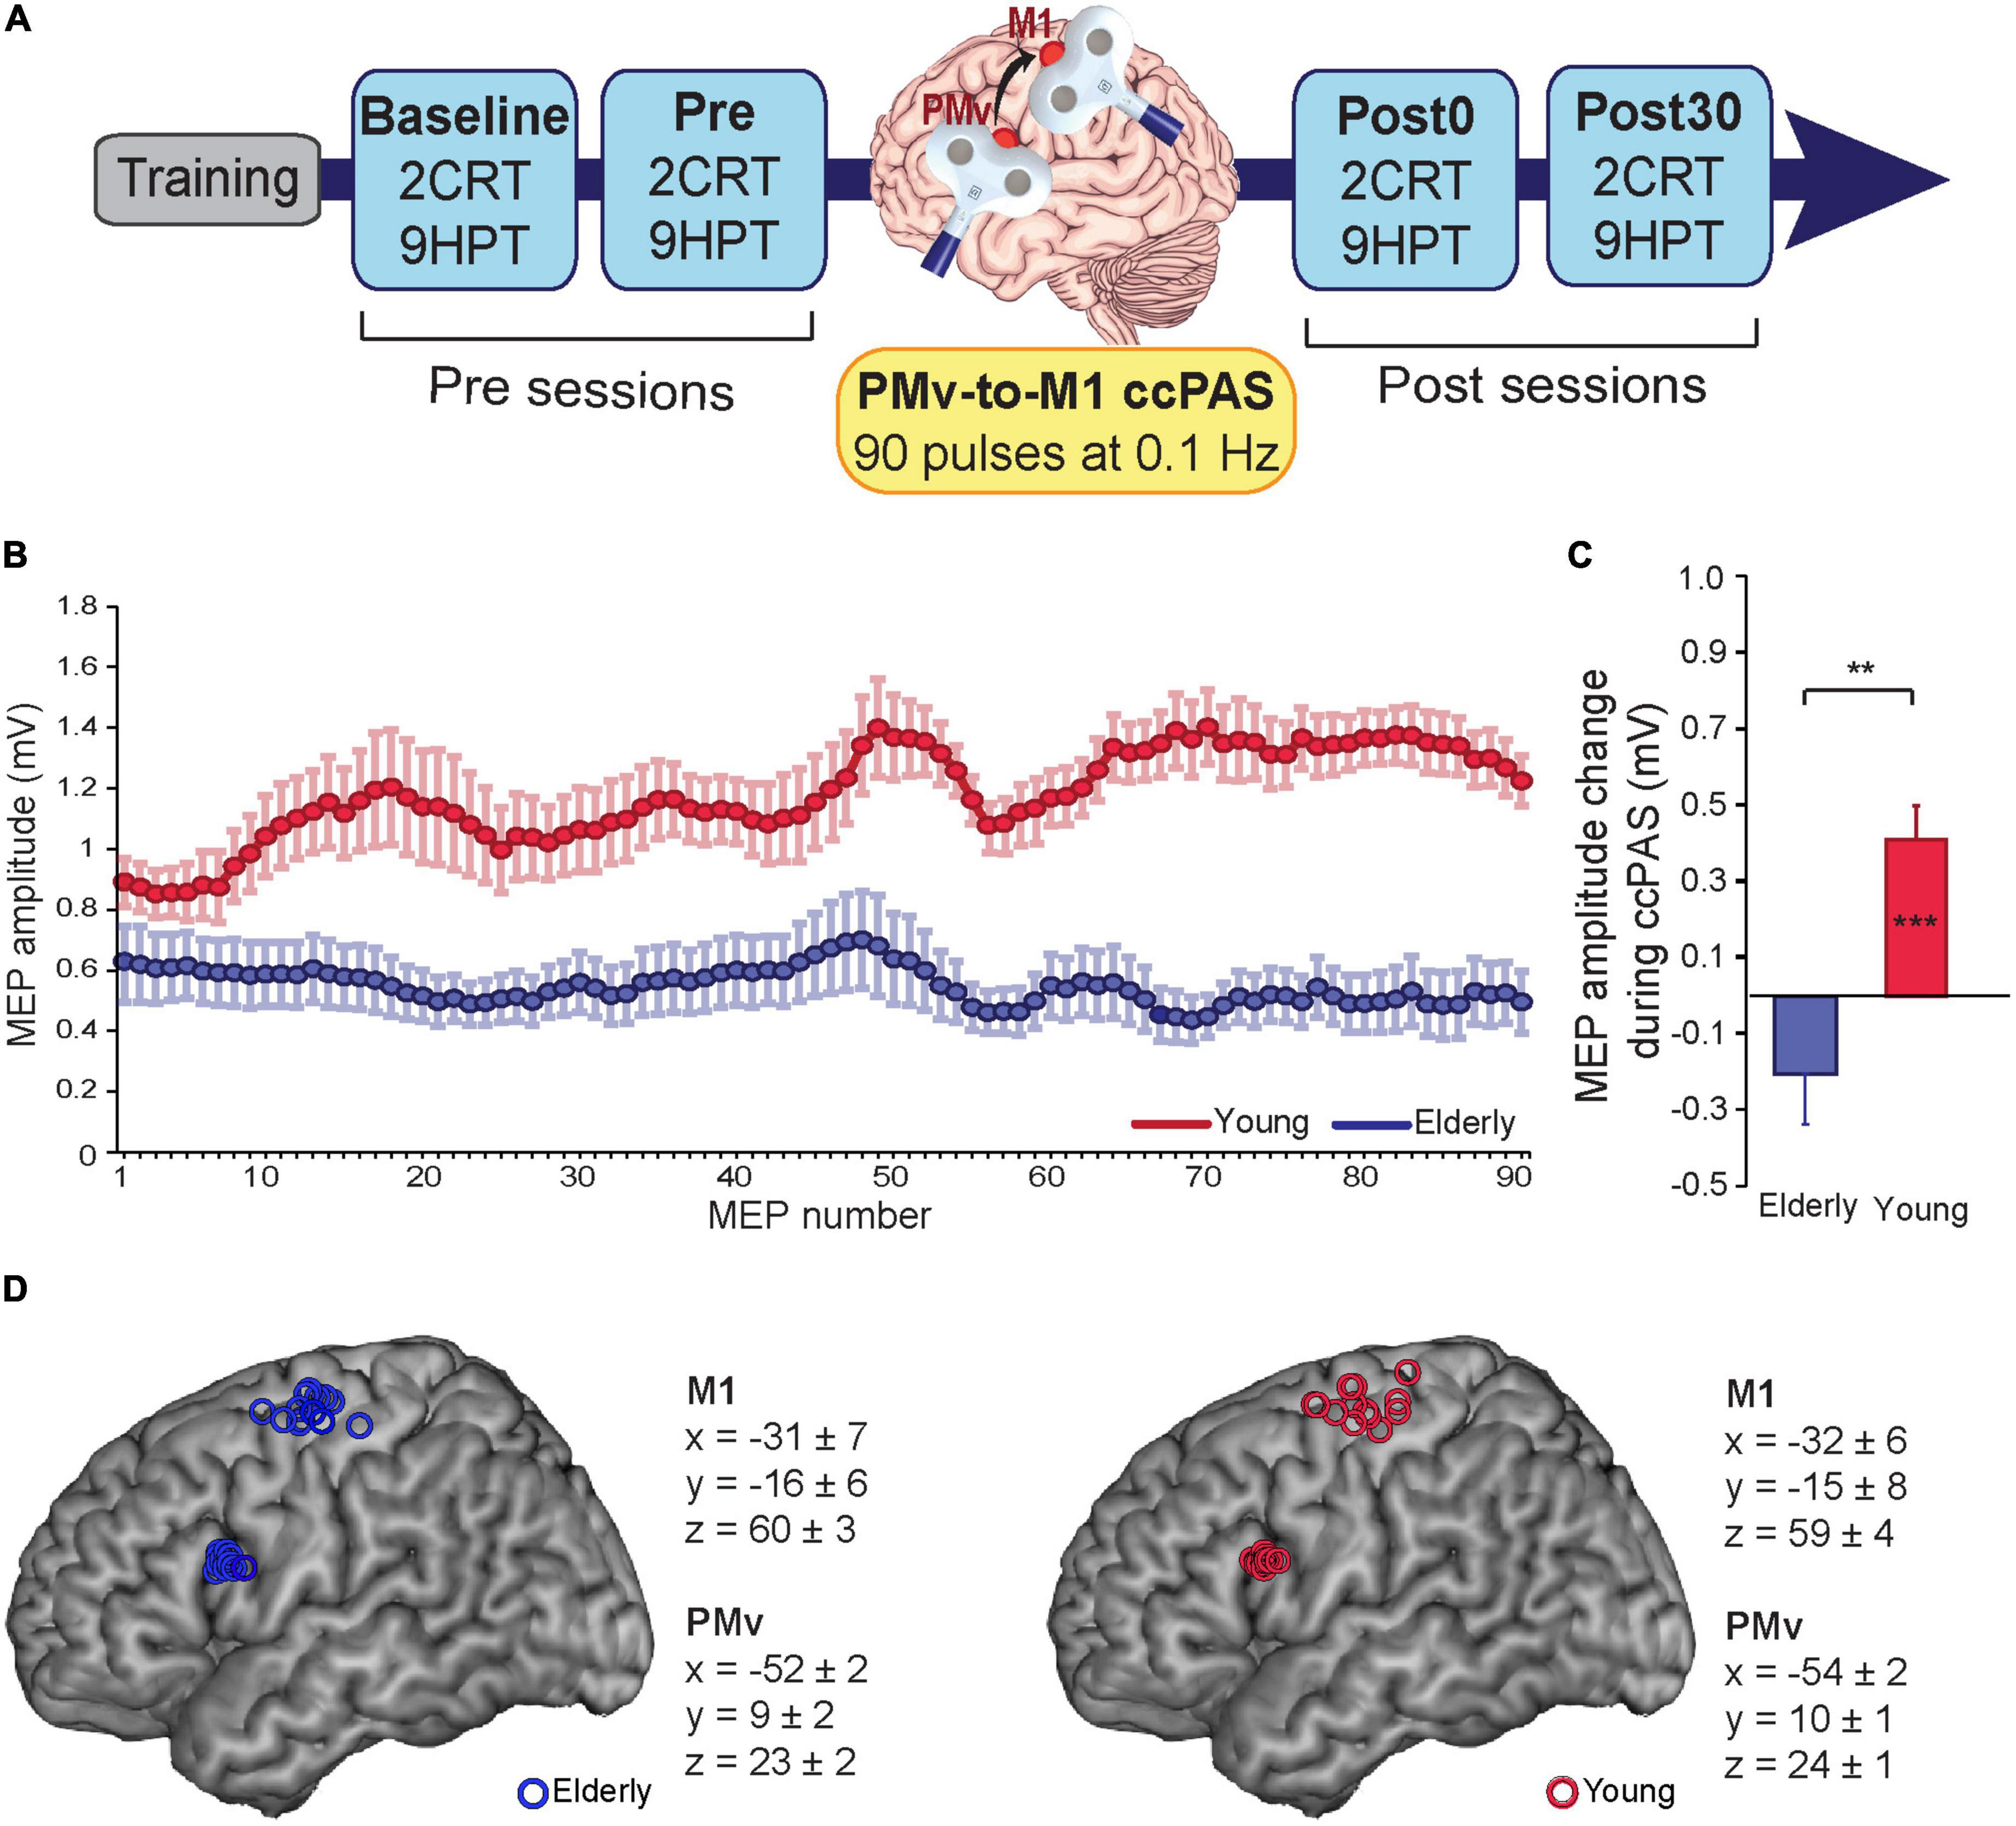 Transcranial cortico-cortical paired associative stimulation (ccPAS) over ventral premotor-motor pathways enhances action performance and corticomotor excitability in young adults more than in elderly adults